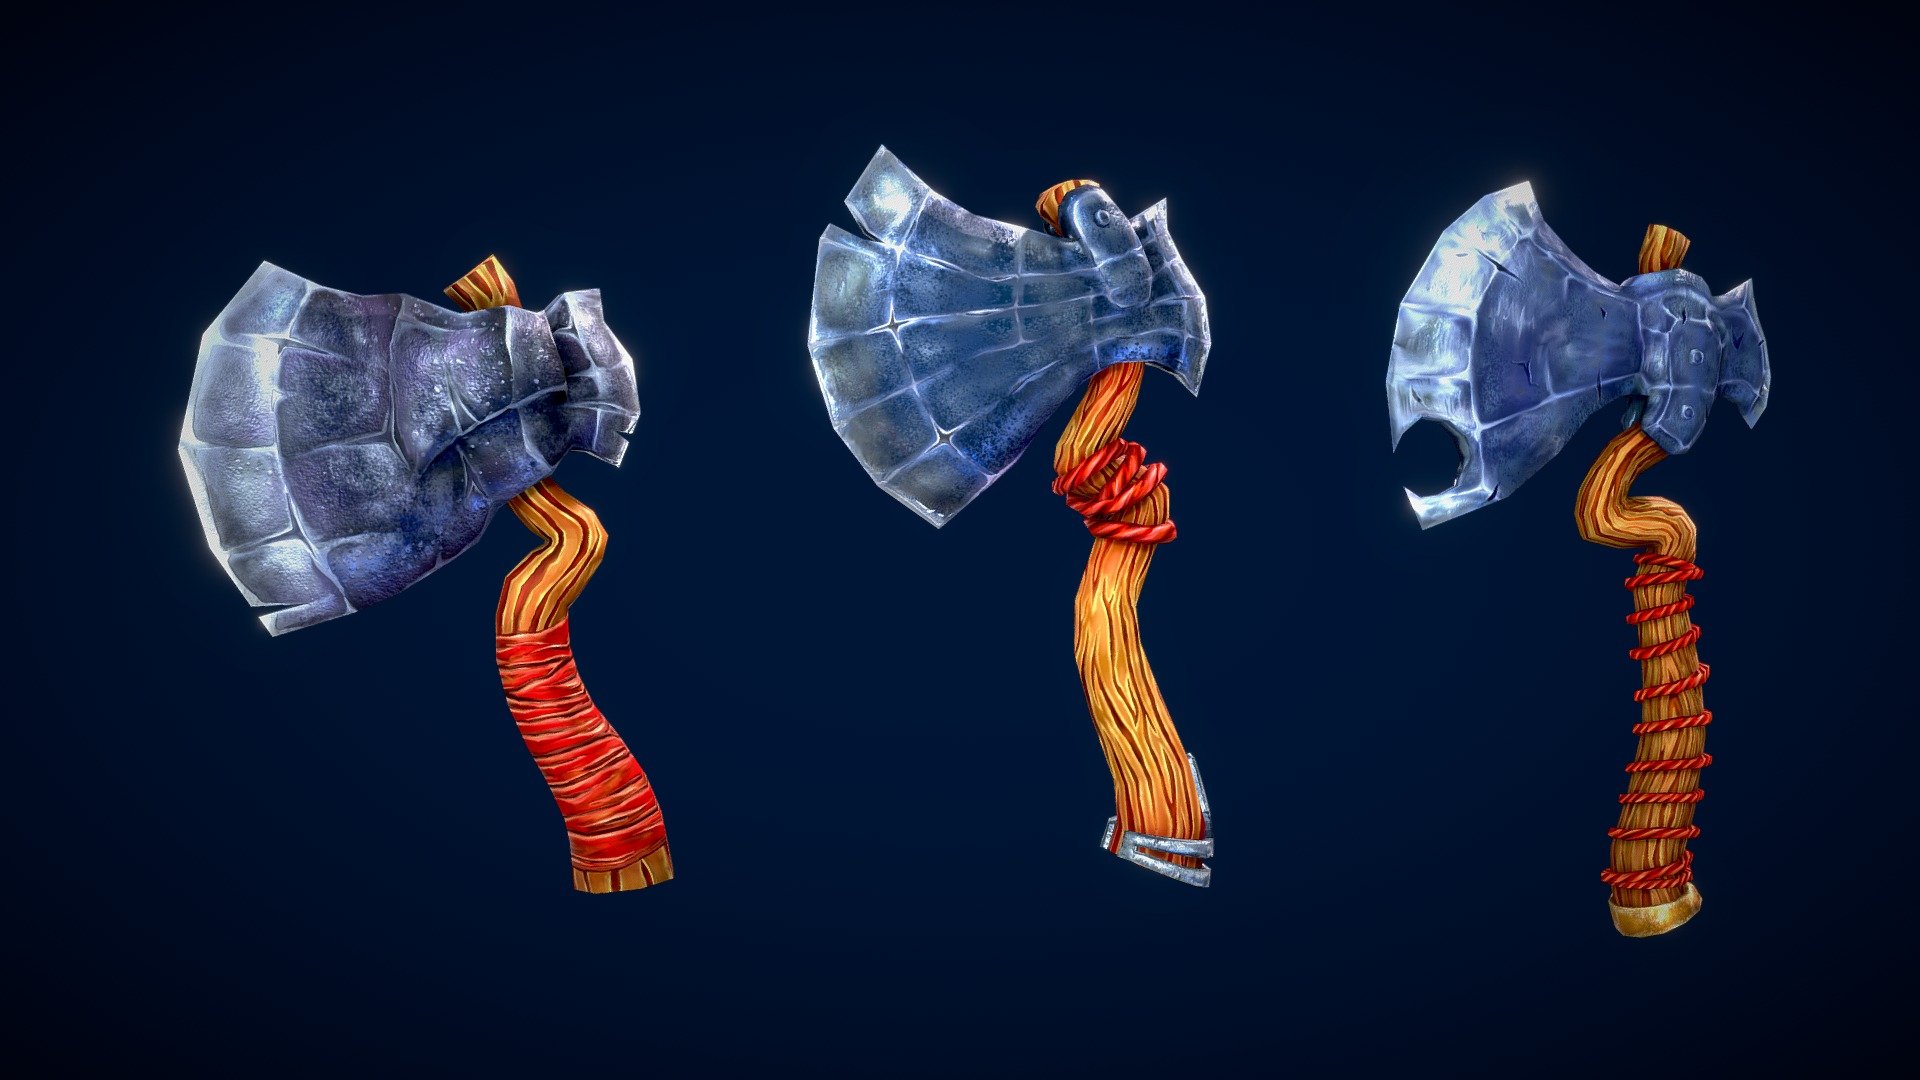 Legendary Three of Axes has fallen to challenge to the hand of the Warriors.
Technical Information:

Texture Formats:
Resolutions 2048x2048px ✓
Ambient Occlusion ✓
BaseColor ✓
Metallic ✓
Normal ✓
Roughness ✓
Height ✓

Number of Textures: 18

File Formats:
FBX, OBJ, .Blend.

Trio Render Preview:


Polygon Preview:
 - Trio Axe Collection 1 (GameReady) - Buy Royalty Free 3D model by adynhaidar 3d model